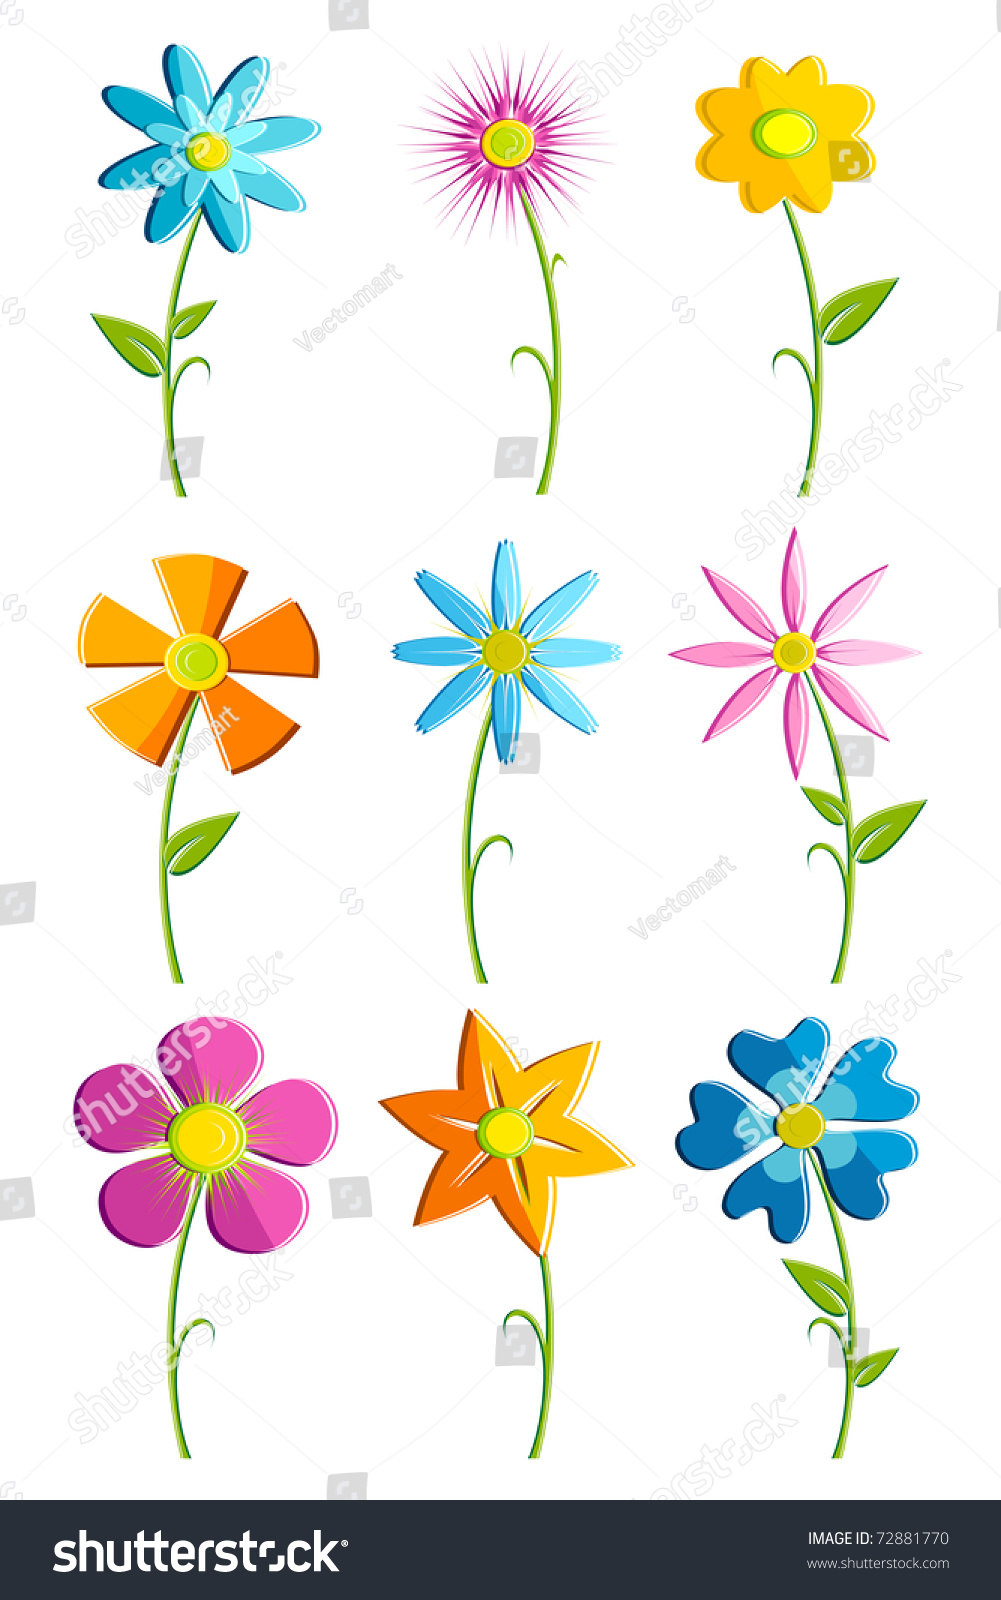 Brightly Colored Psychedelic Cartoon Flowers Butterfly Stock ...